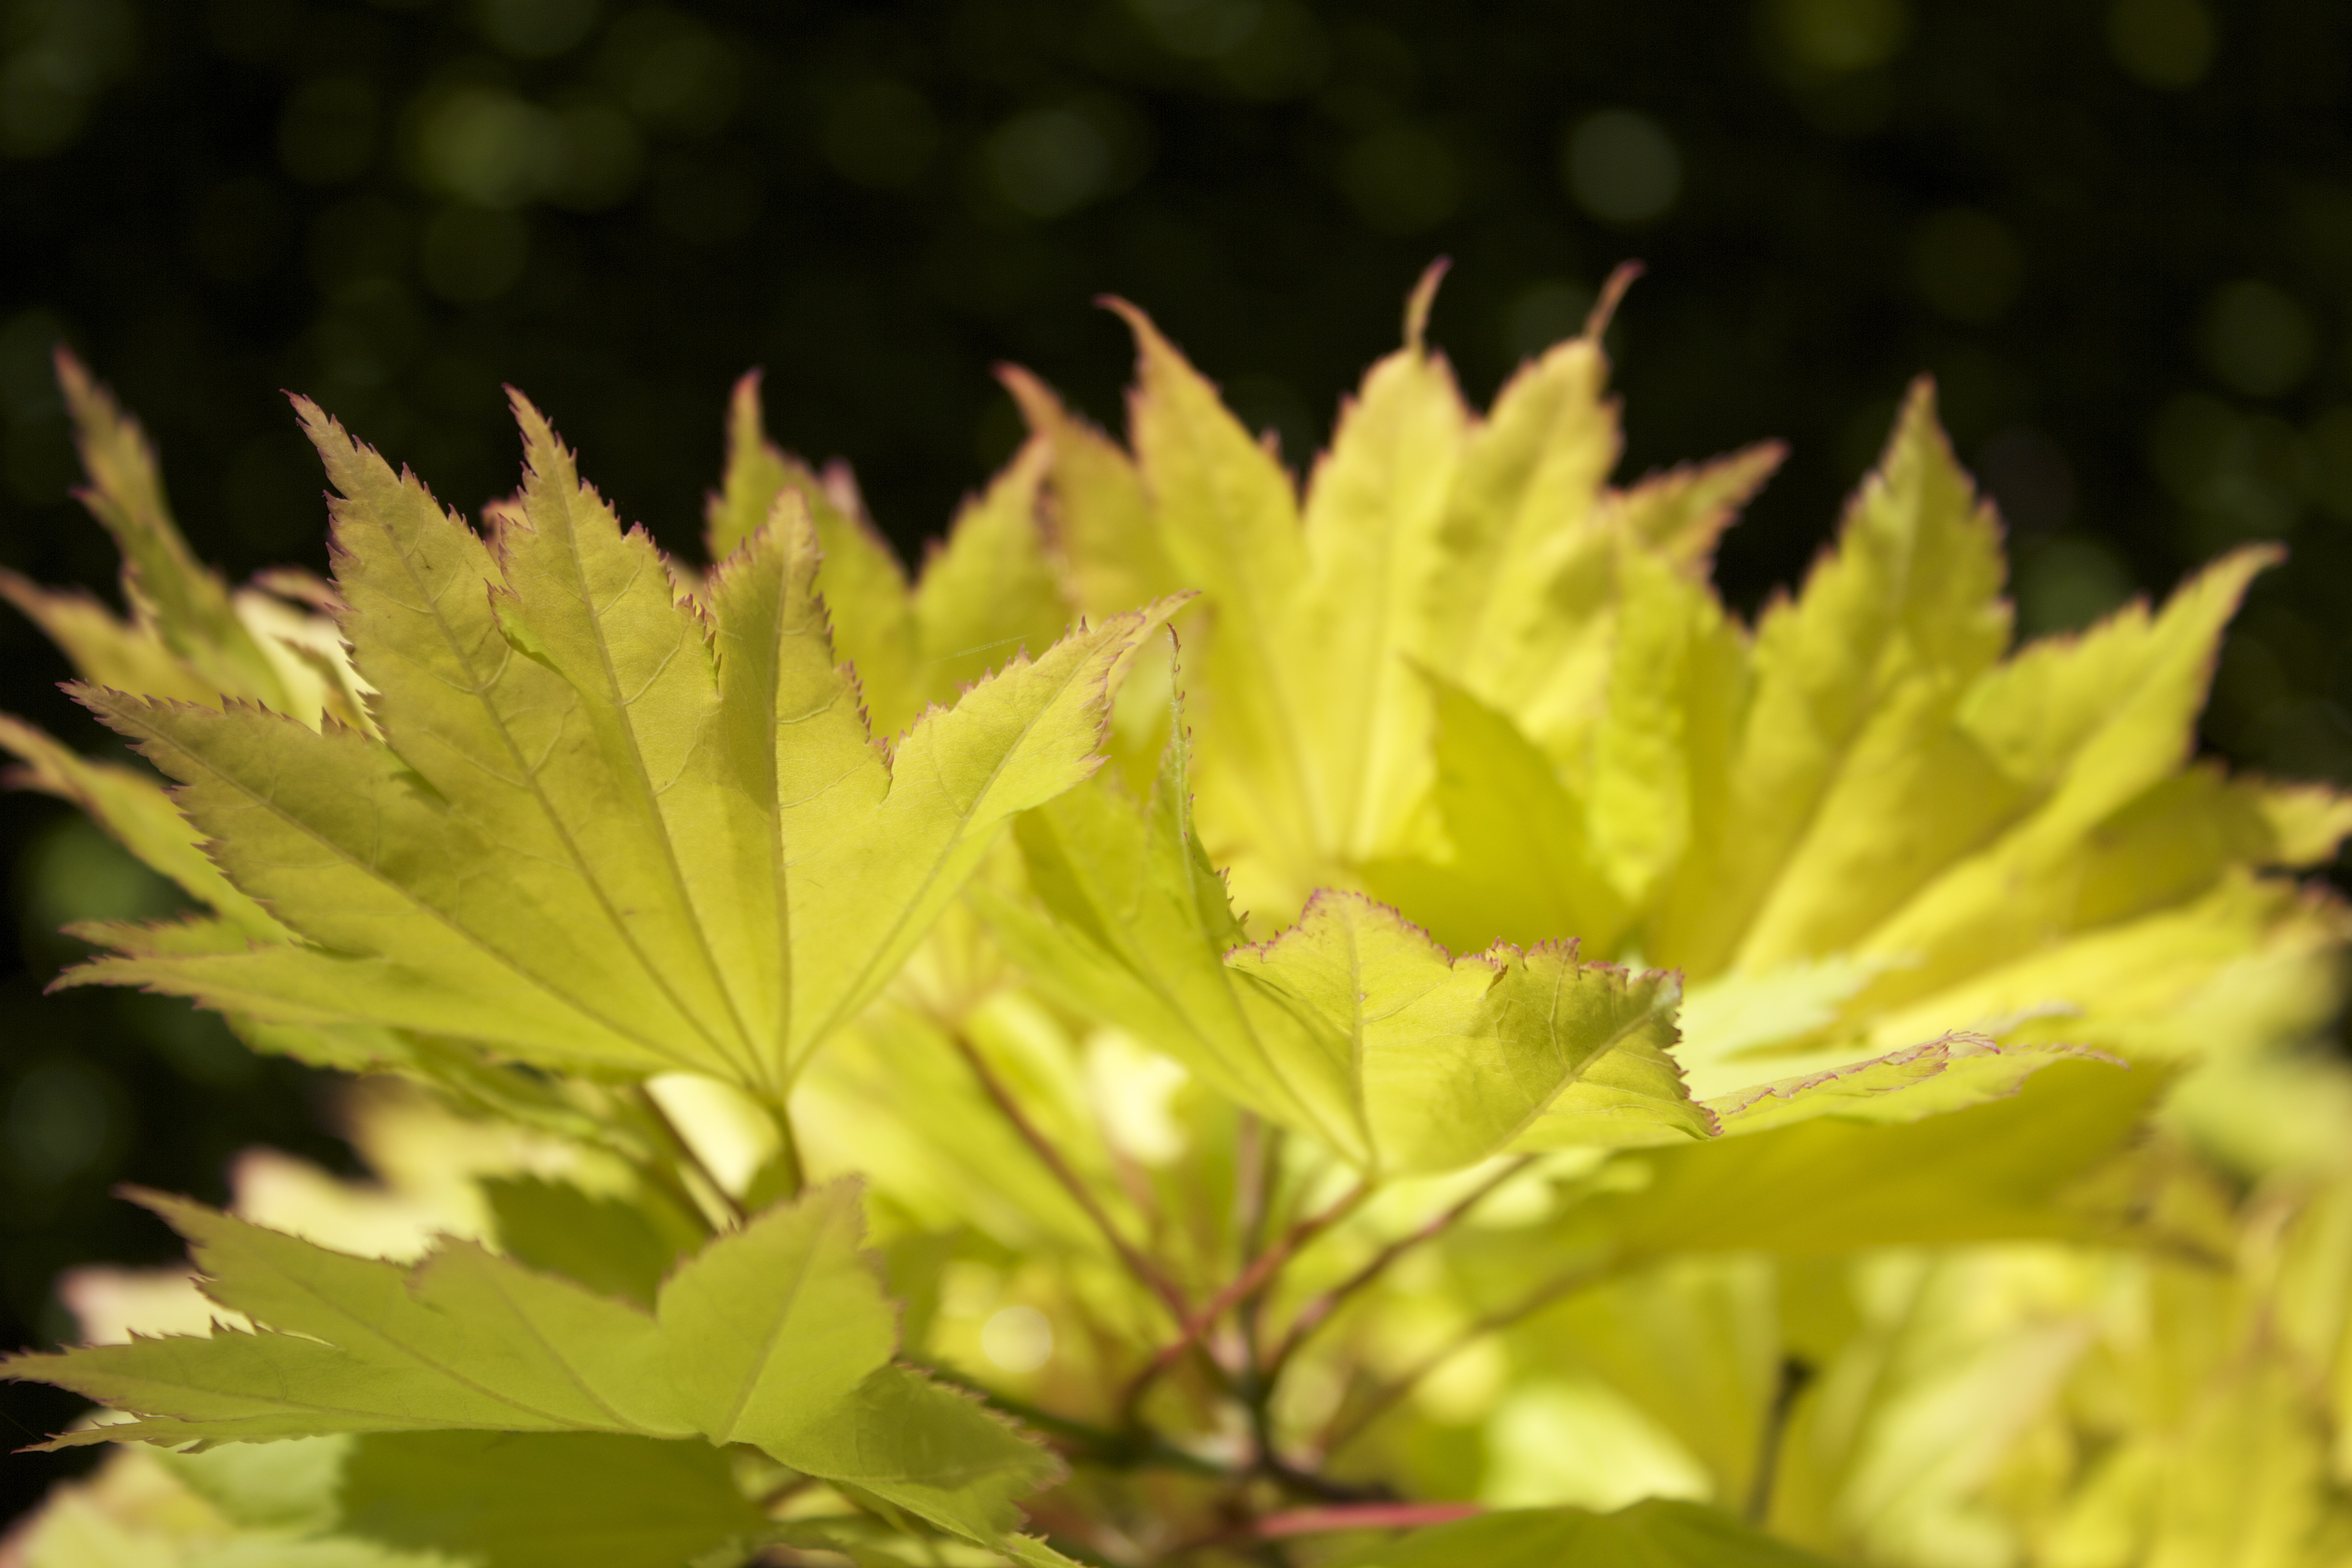 Bright yellow-green leaves against a dark black background.